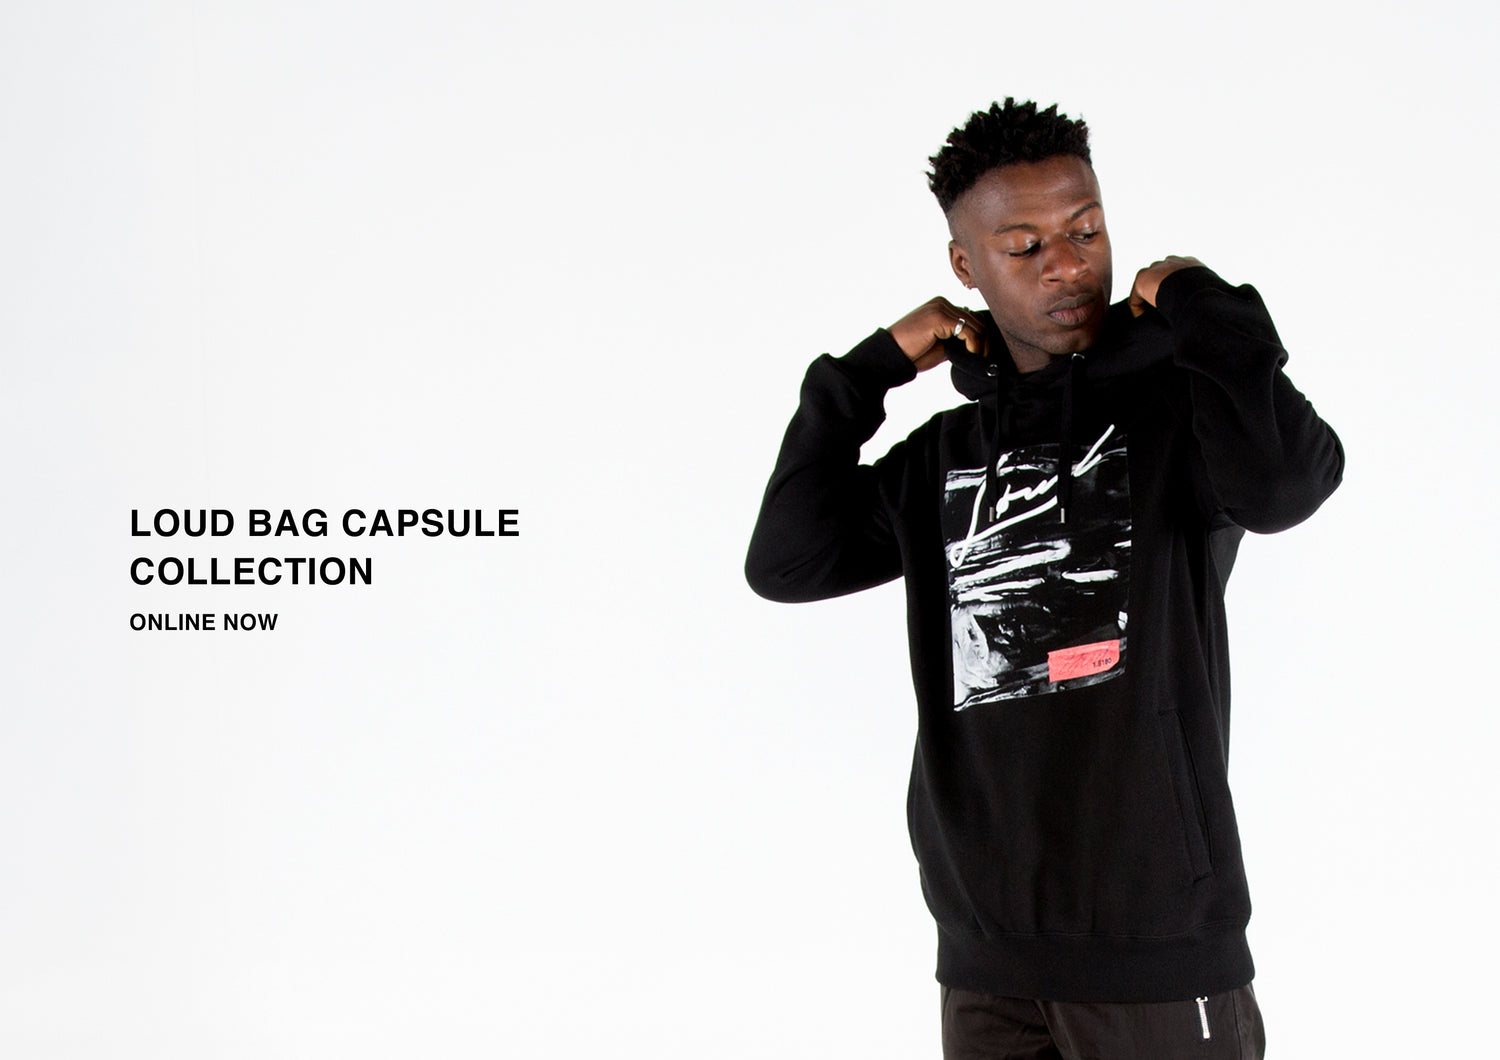 LOUD BAG CAPSULE COLLECTION - ONLINE NOW.